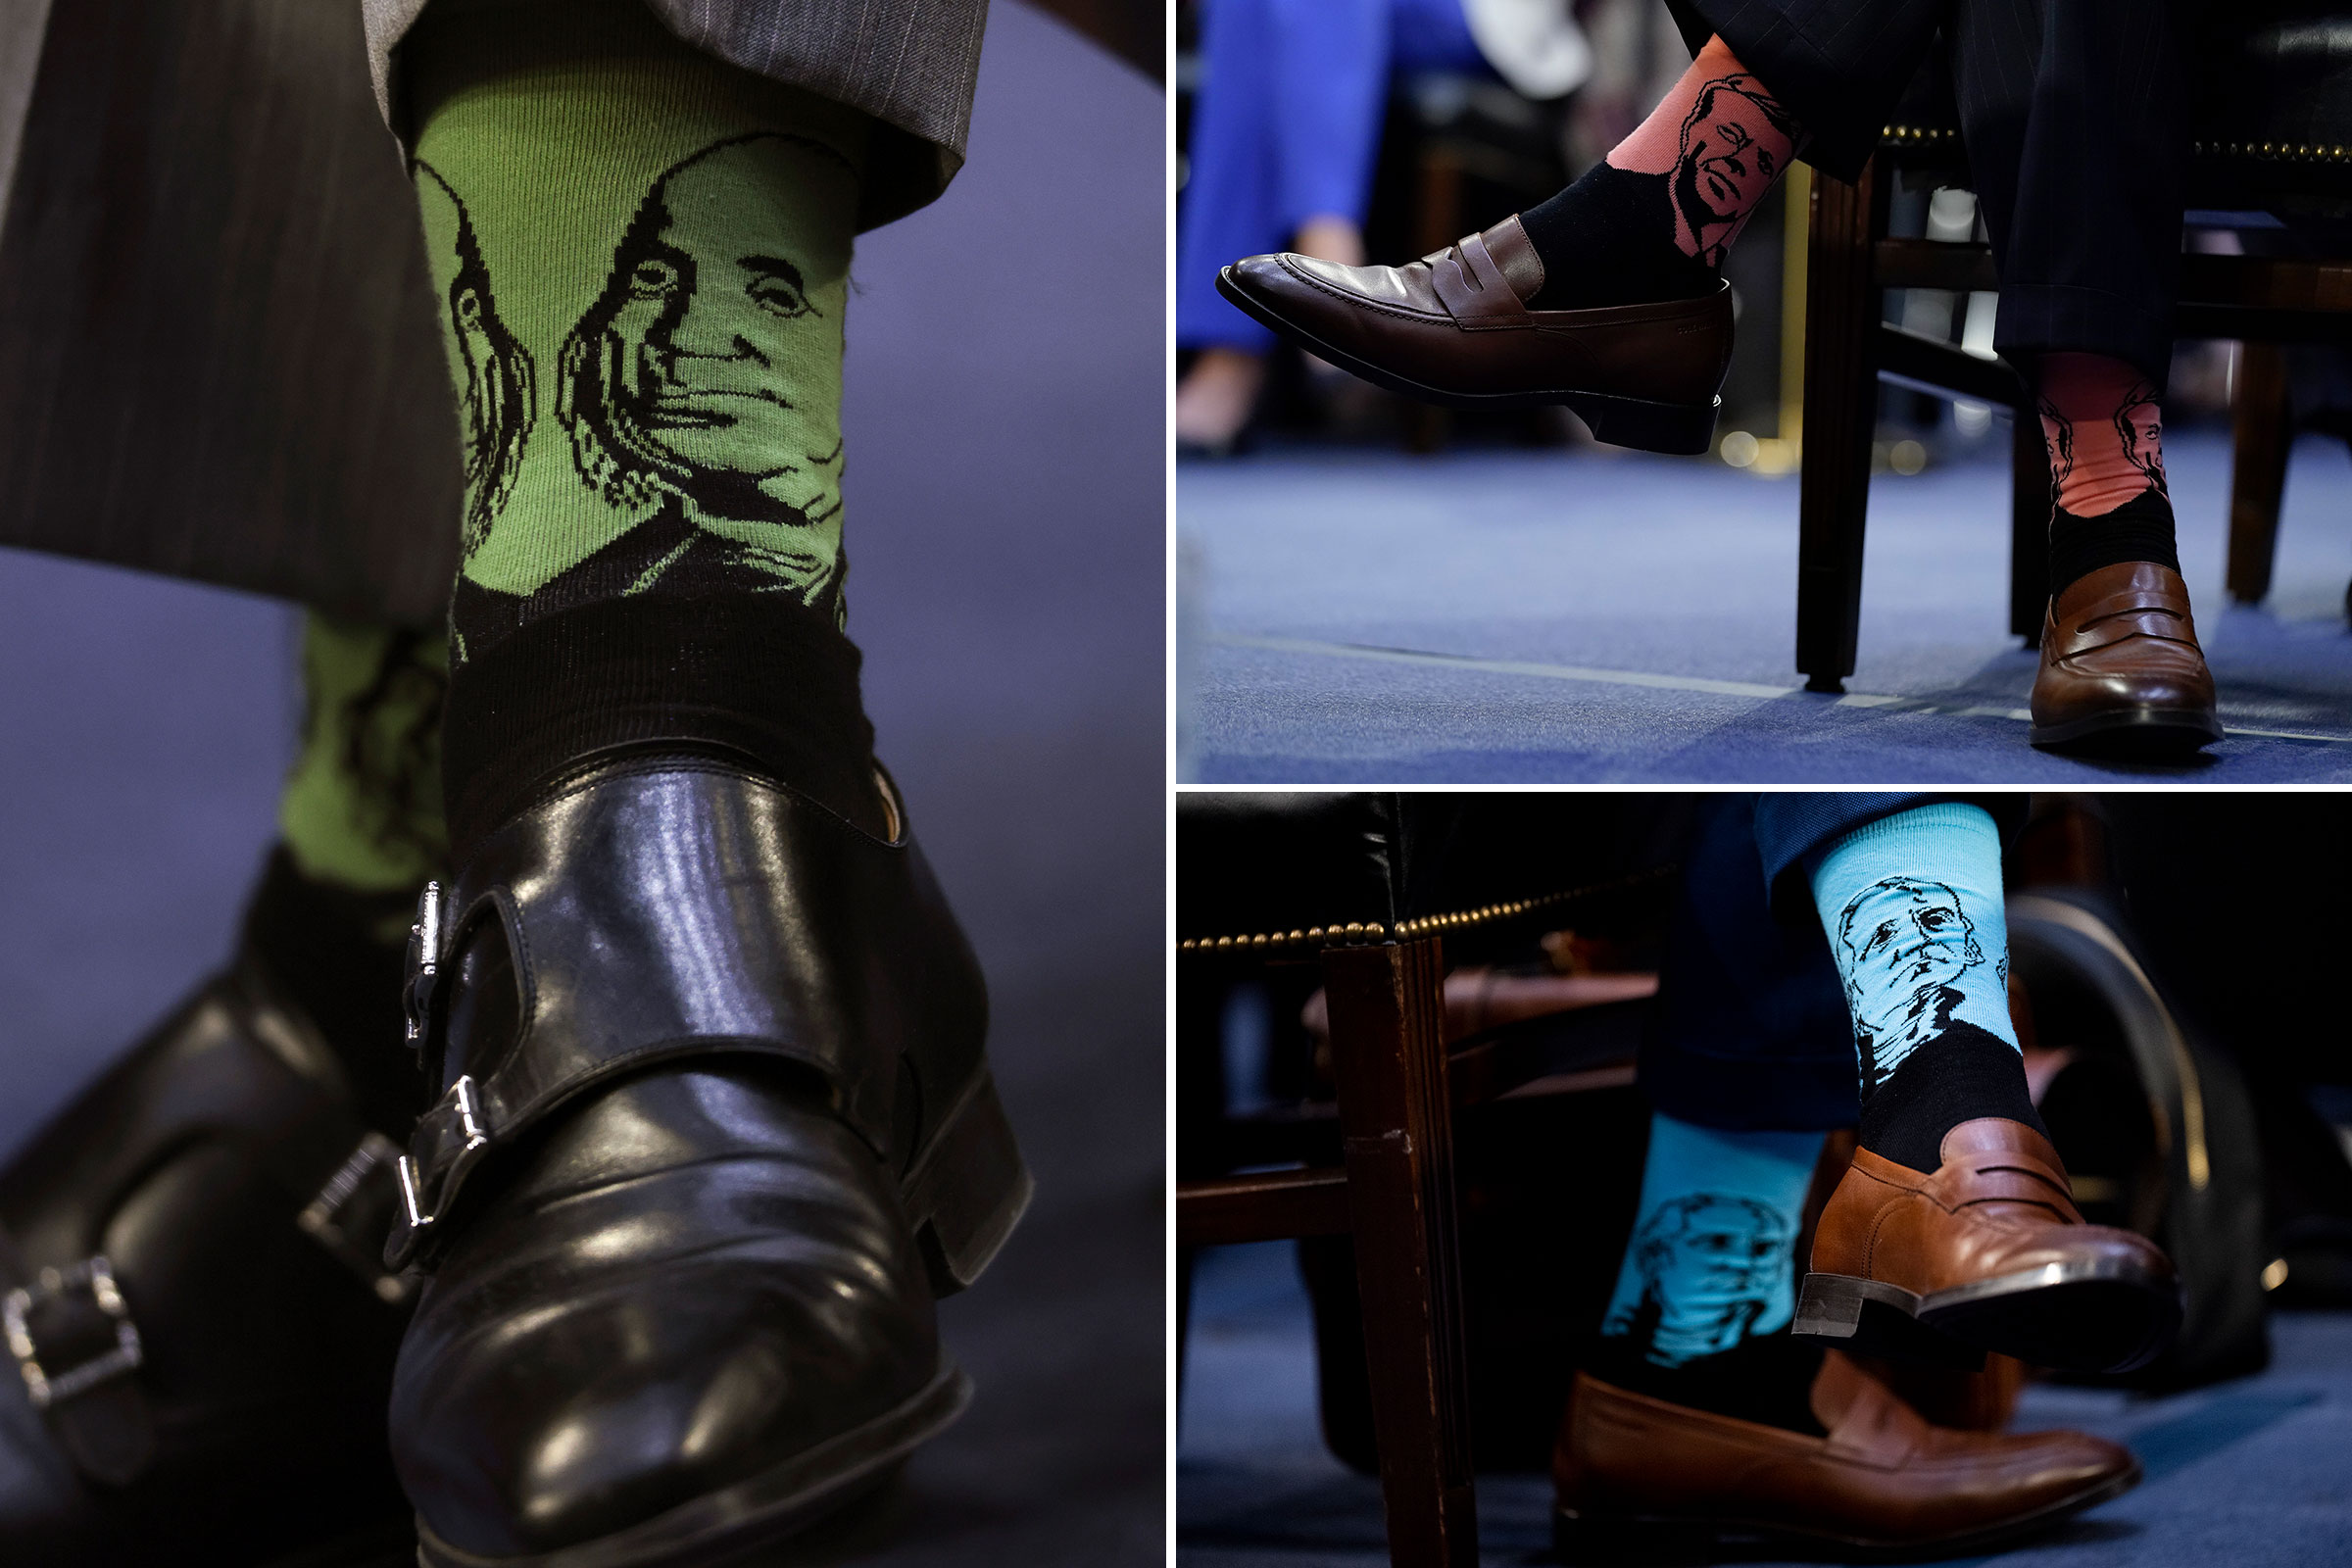 Patrick Jackson's fashion choices made a small splash as the week progressed. For the first three days, his multicolor socks featured different notable Americans: Benjamin Franklin, Thomas Jefferson and John F. Kennedy. (Win McNamee—Getty Images; Andrew Harnik—AP; Bill Clark—CQ Roll Call/AP)